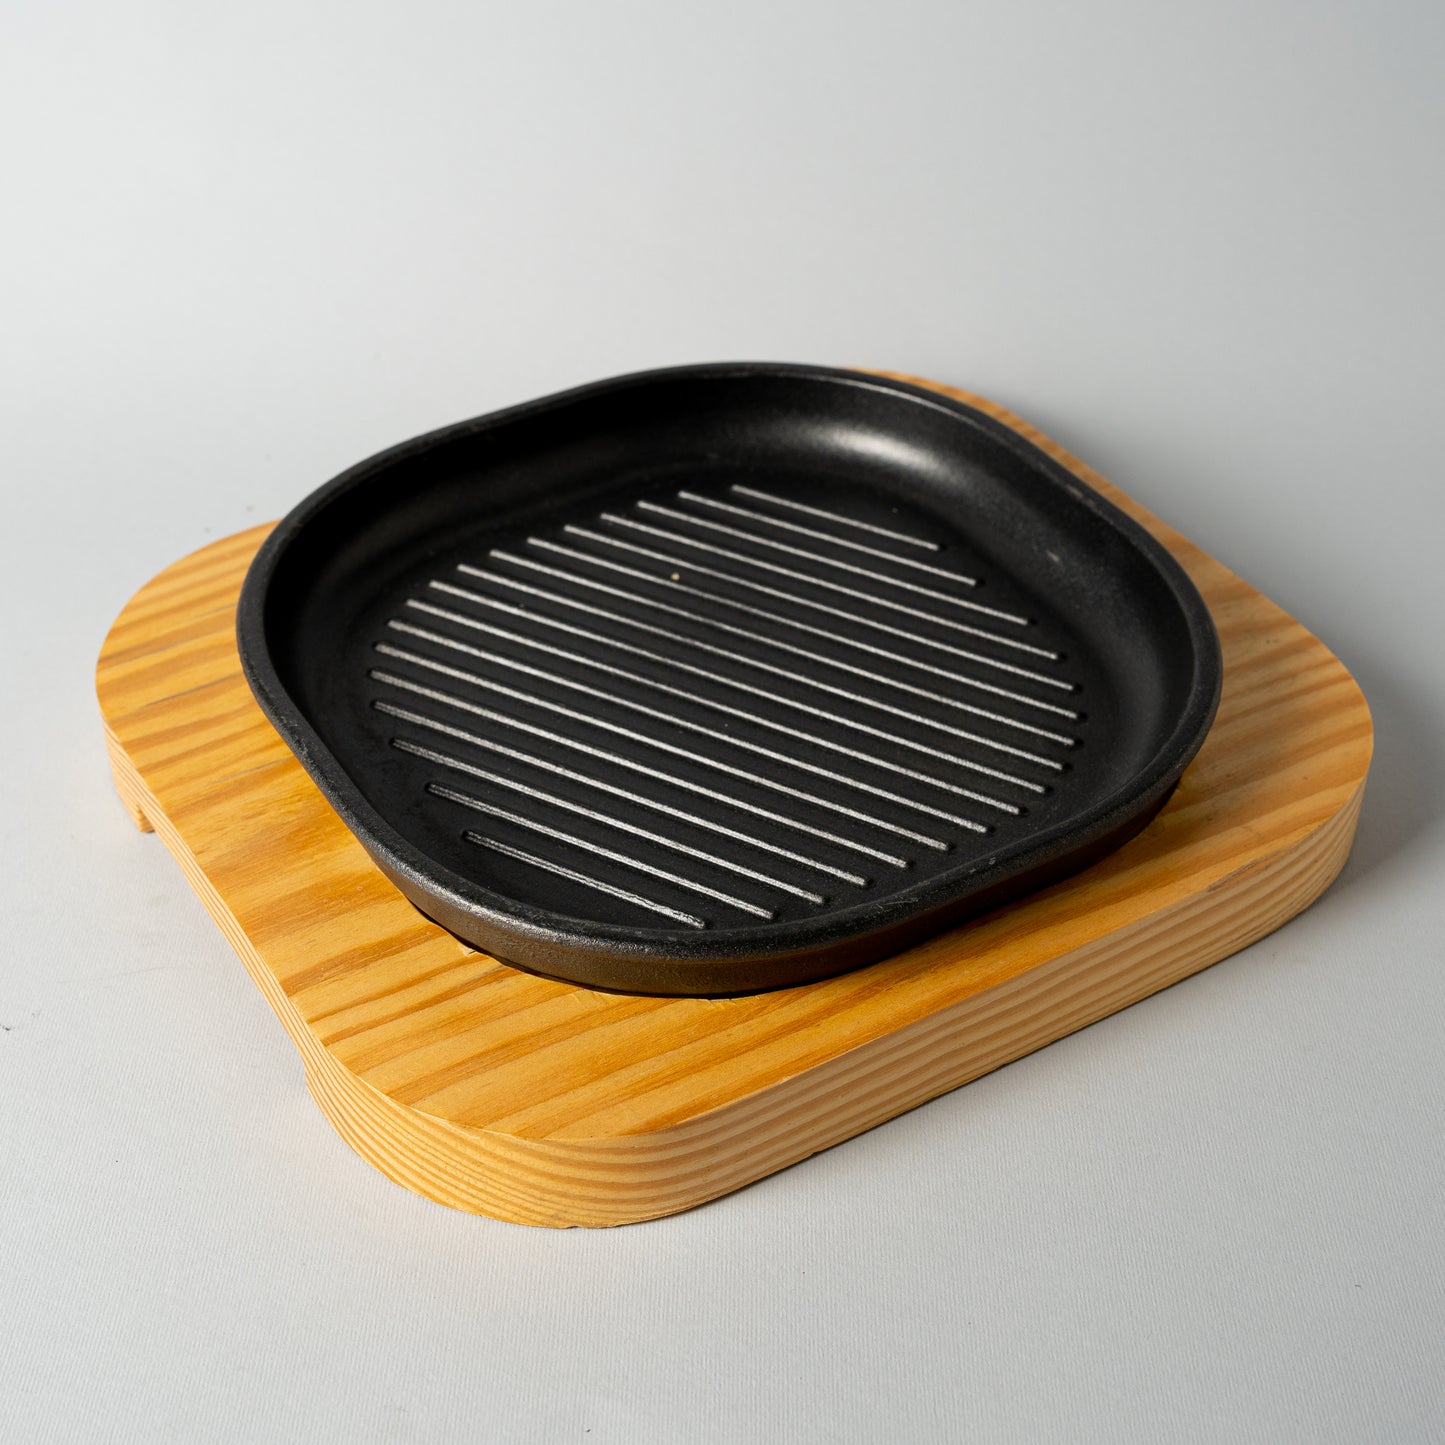 Cast Iron Grill With Wooden Base